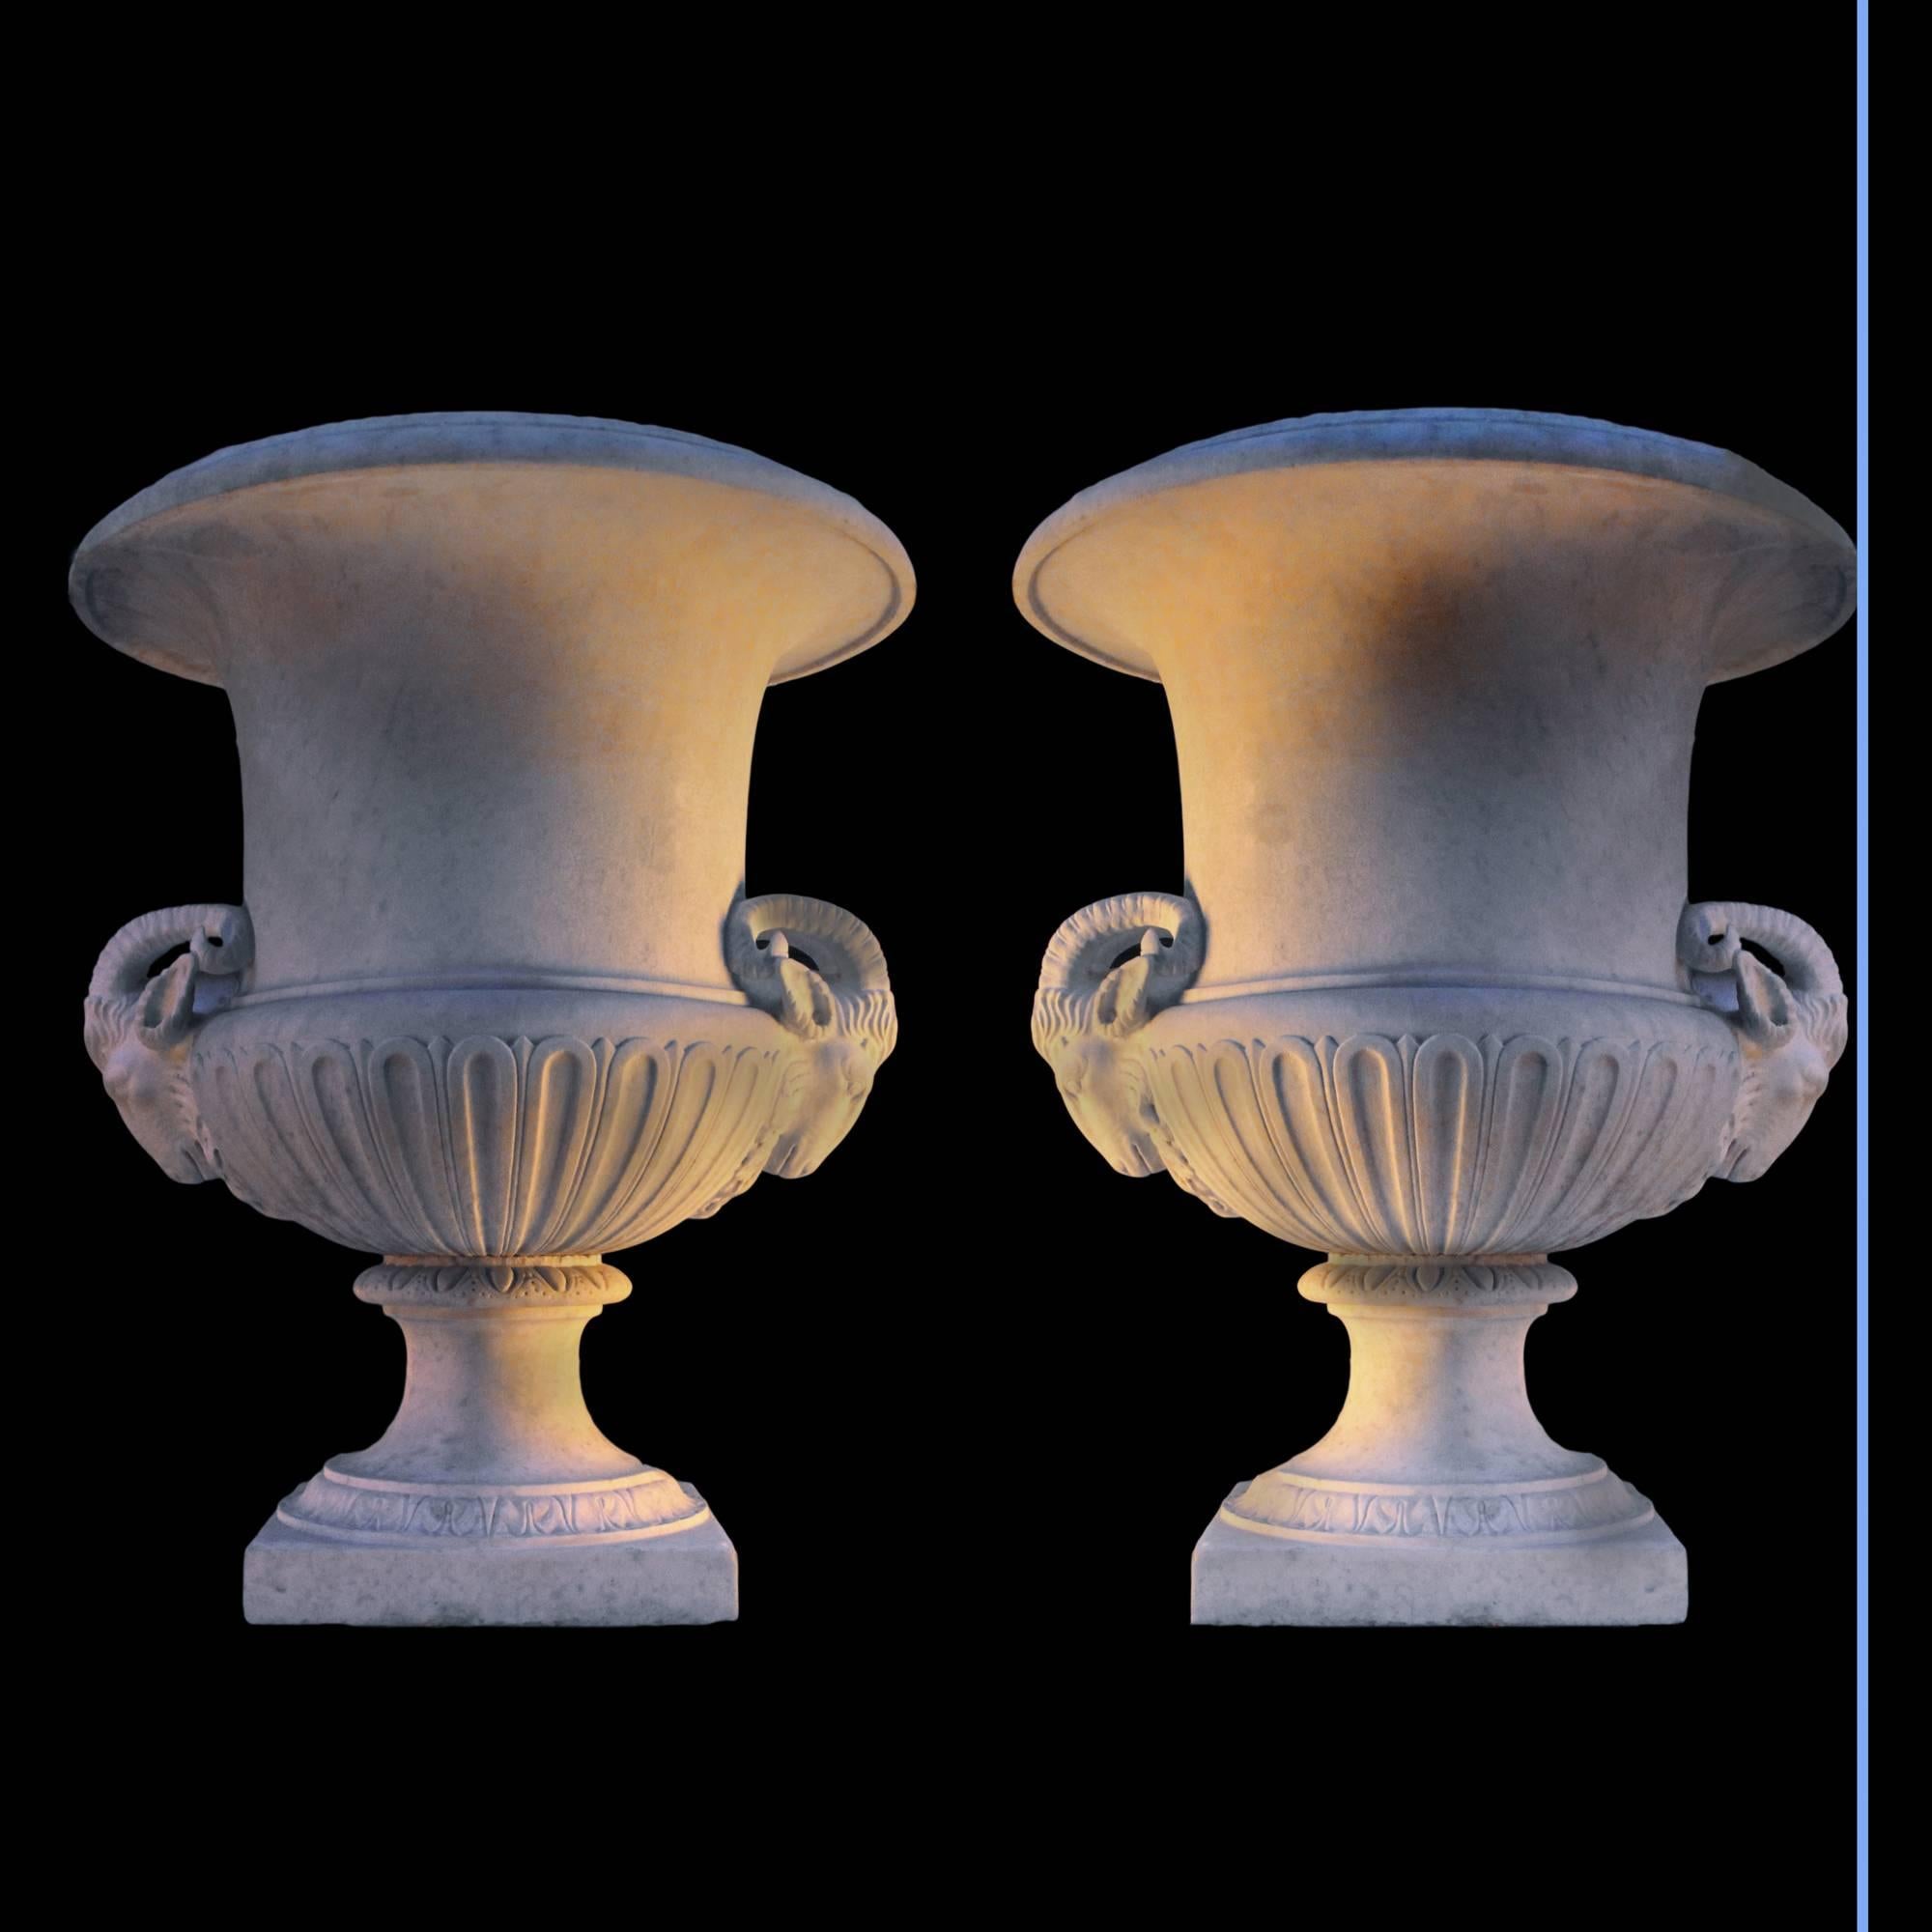 Pair of marble vases with heads of ram.
Statuary Classic white marble with recent wood pedestal
19th century.
Vase: H. 119, W. 85, D. 86 cm.
Pedestal: H. 143, W. 103, D. 103 cm.

The stylization of the head of ram was always moderate according